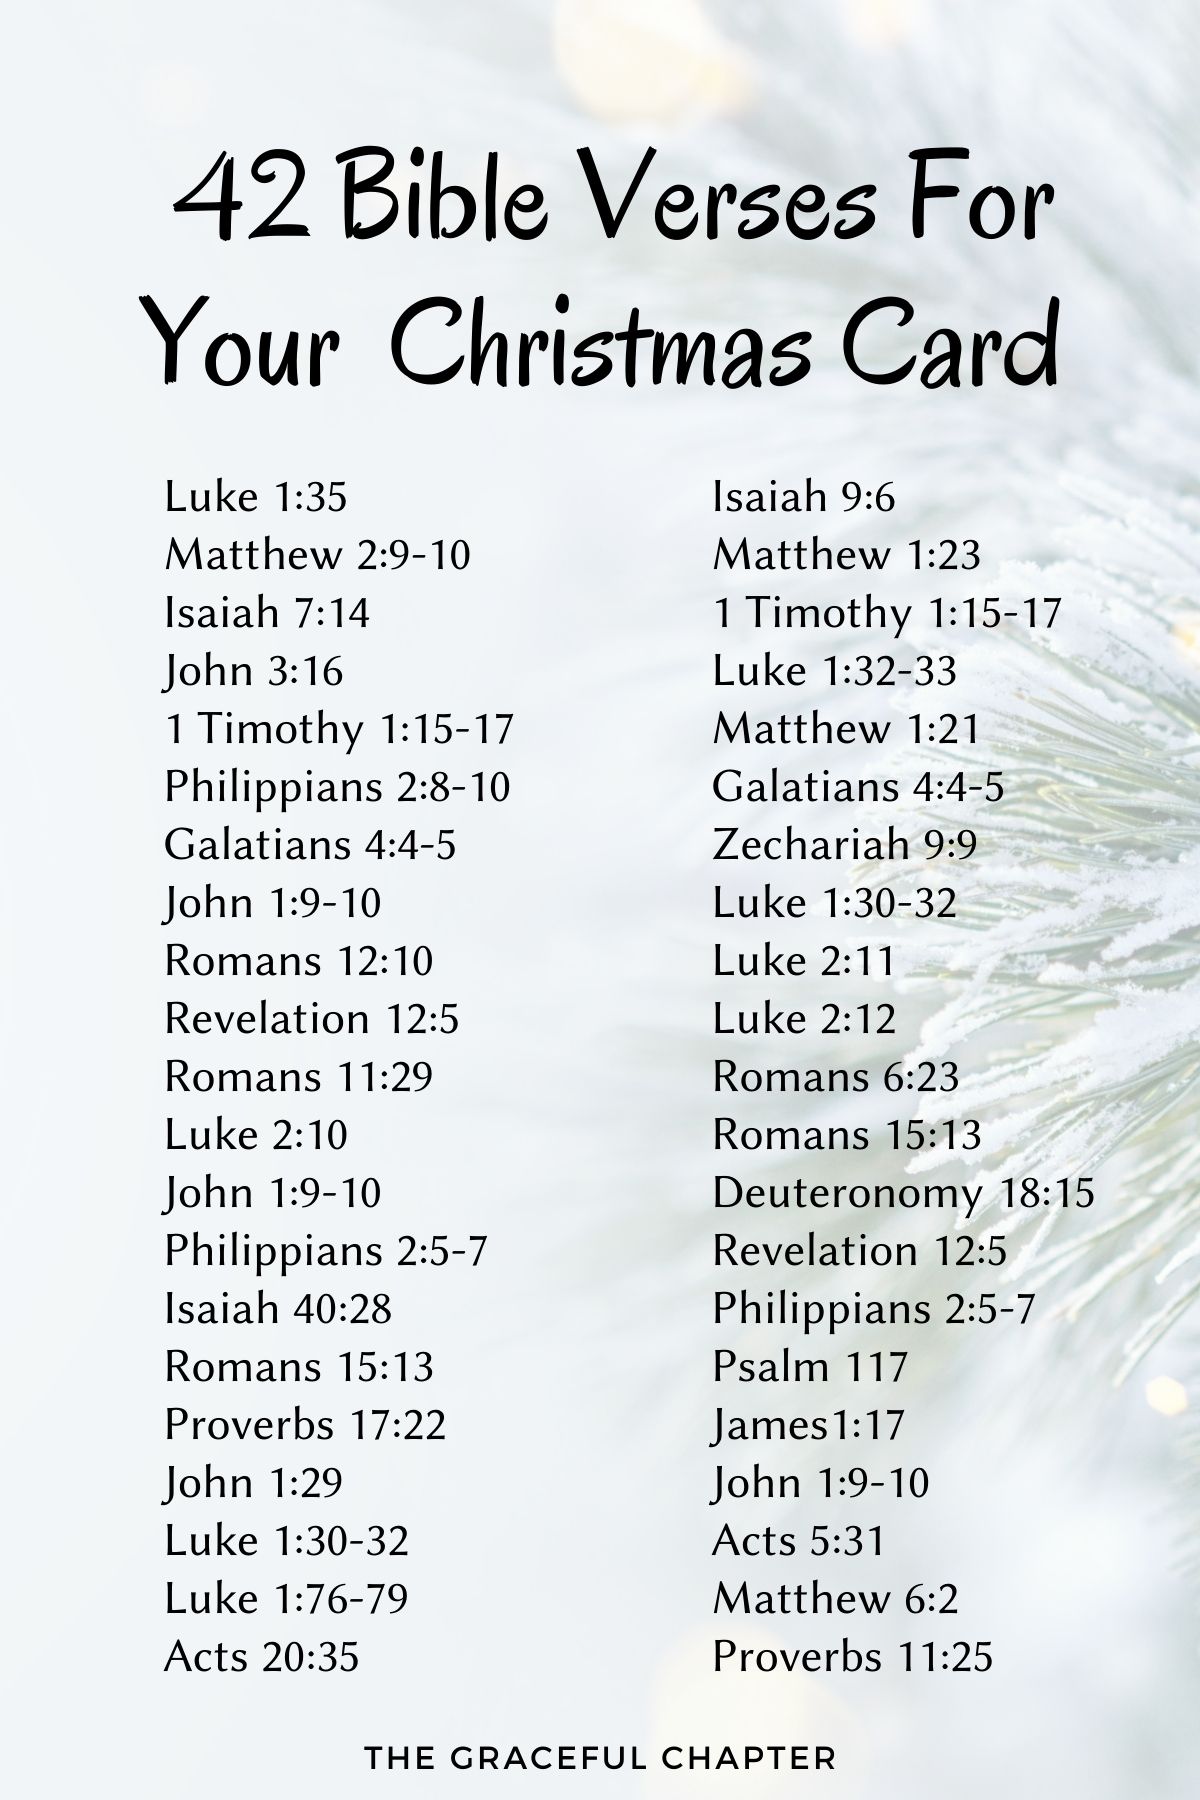 42 bible verses for christmas cards